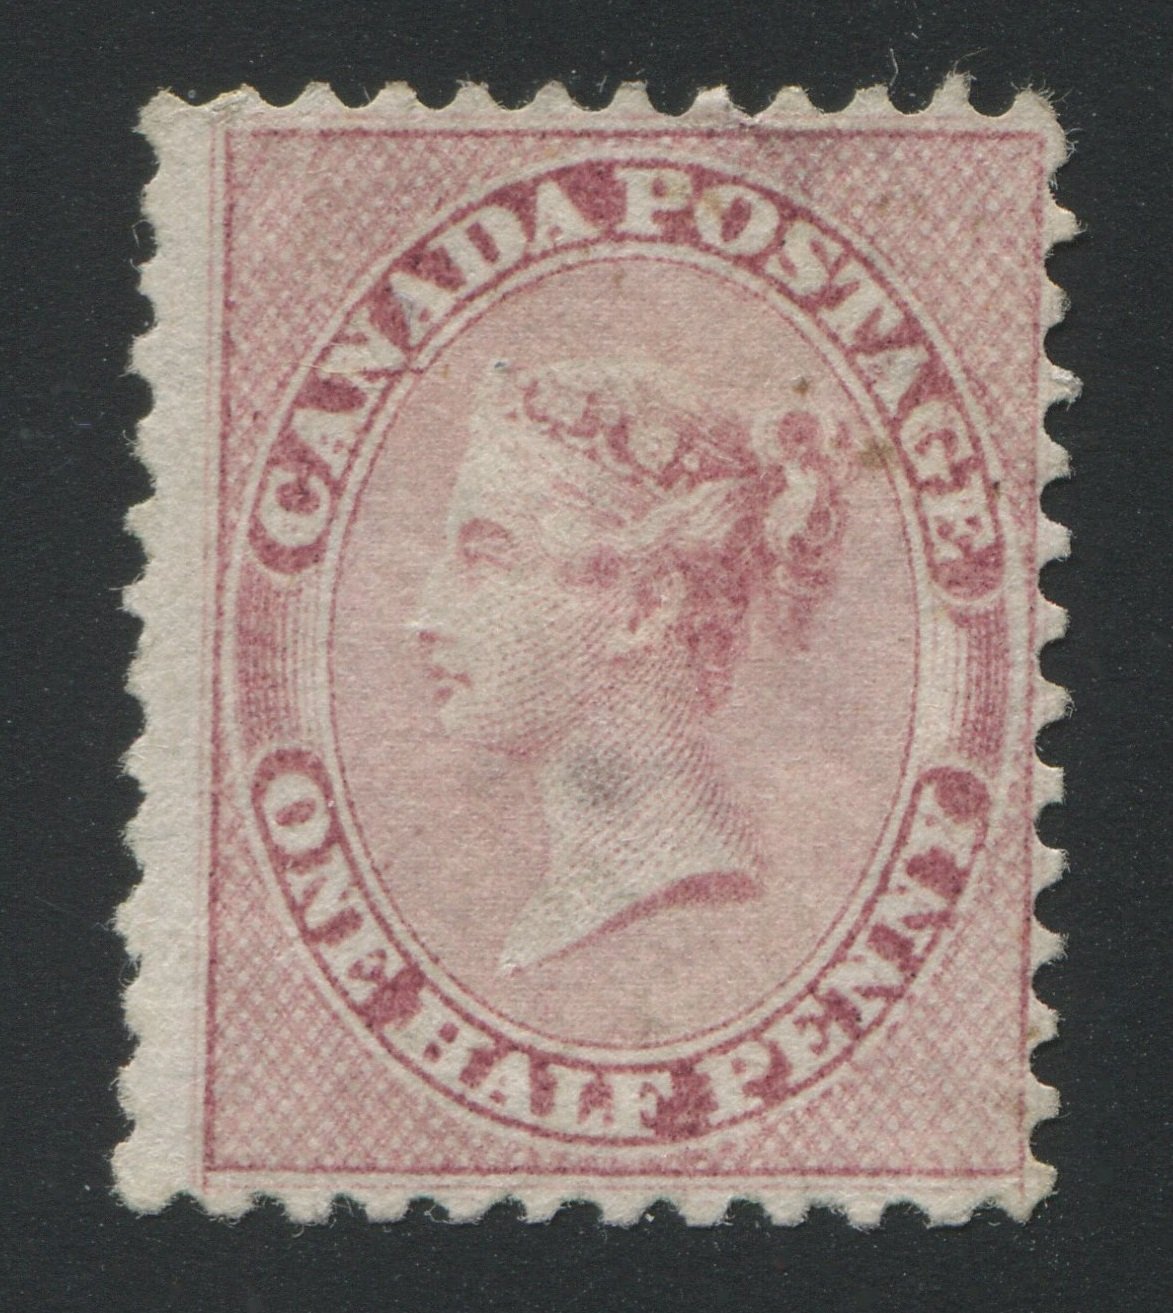 0011CA1709 - Canada #11i - Used Strong Re-Entry - Deveney Stamps Ltd. Canadian Stamps